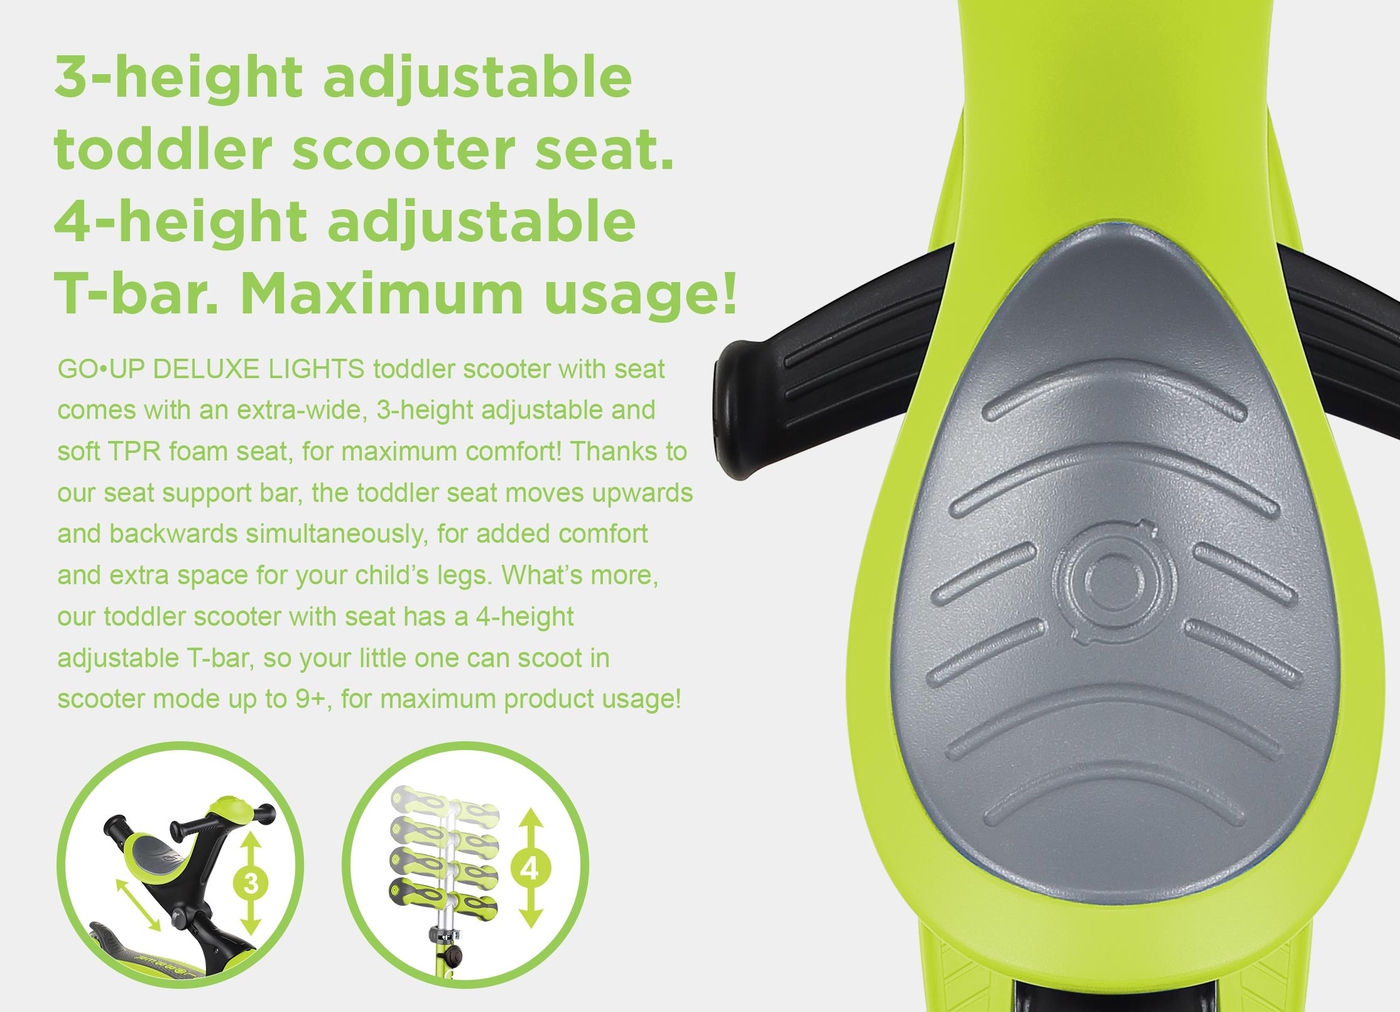 3-height adjustable toddler scooter seat. 4-height adjustable T-bar. Maximum usage! GO•UP DELUXE LIGHTS toddler scooter with seat comes with an extra-wide, 3-height adjustable and soft TPR foam seat, for maximum comfort! Thanks to our seat support bar, the toddler seat moves upwards and backwards simultaneously, for added comfort and extra space for your child’s legs. What’s more, our toddler scooter with seat has a 4-height adjustable T-bar, so your little one can scoot in scooter mode up to 9+, for maximum product usage! 